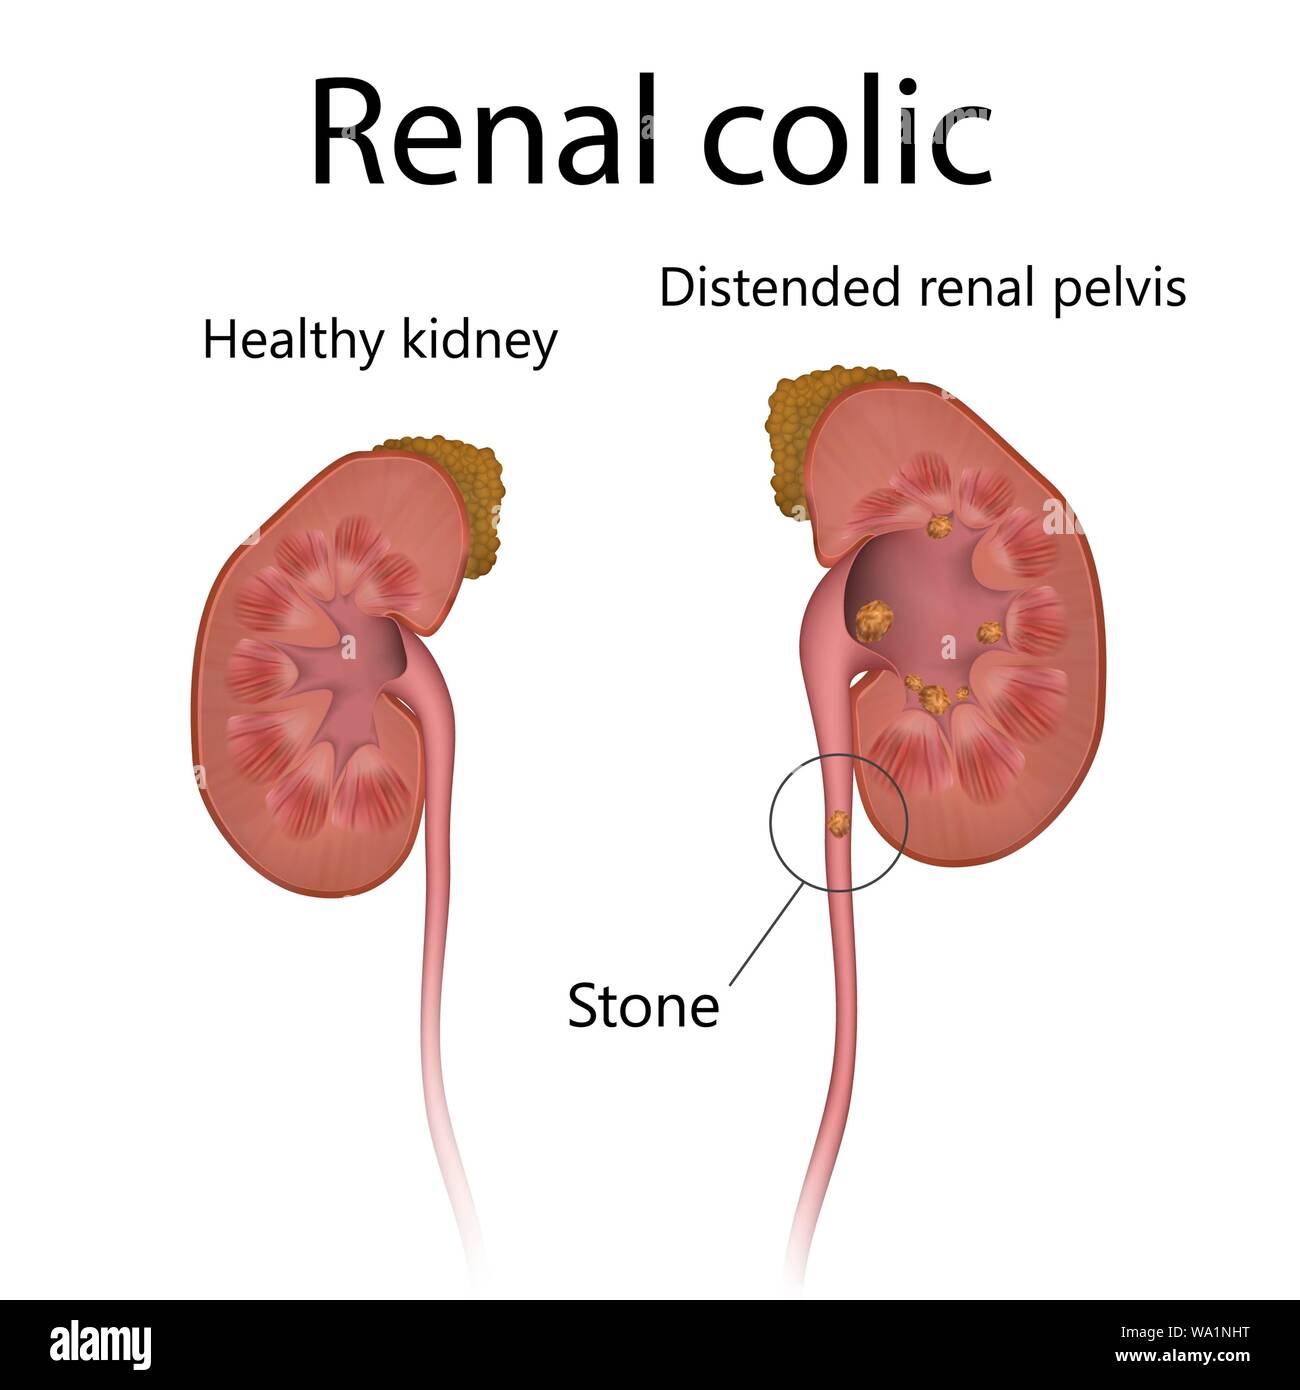 Healthy kidney, comparison with renal colic, illustration. The kidney at right has a distended renal pelvis. Stock Photo